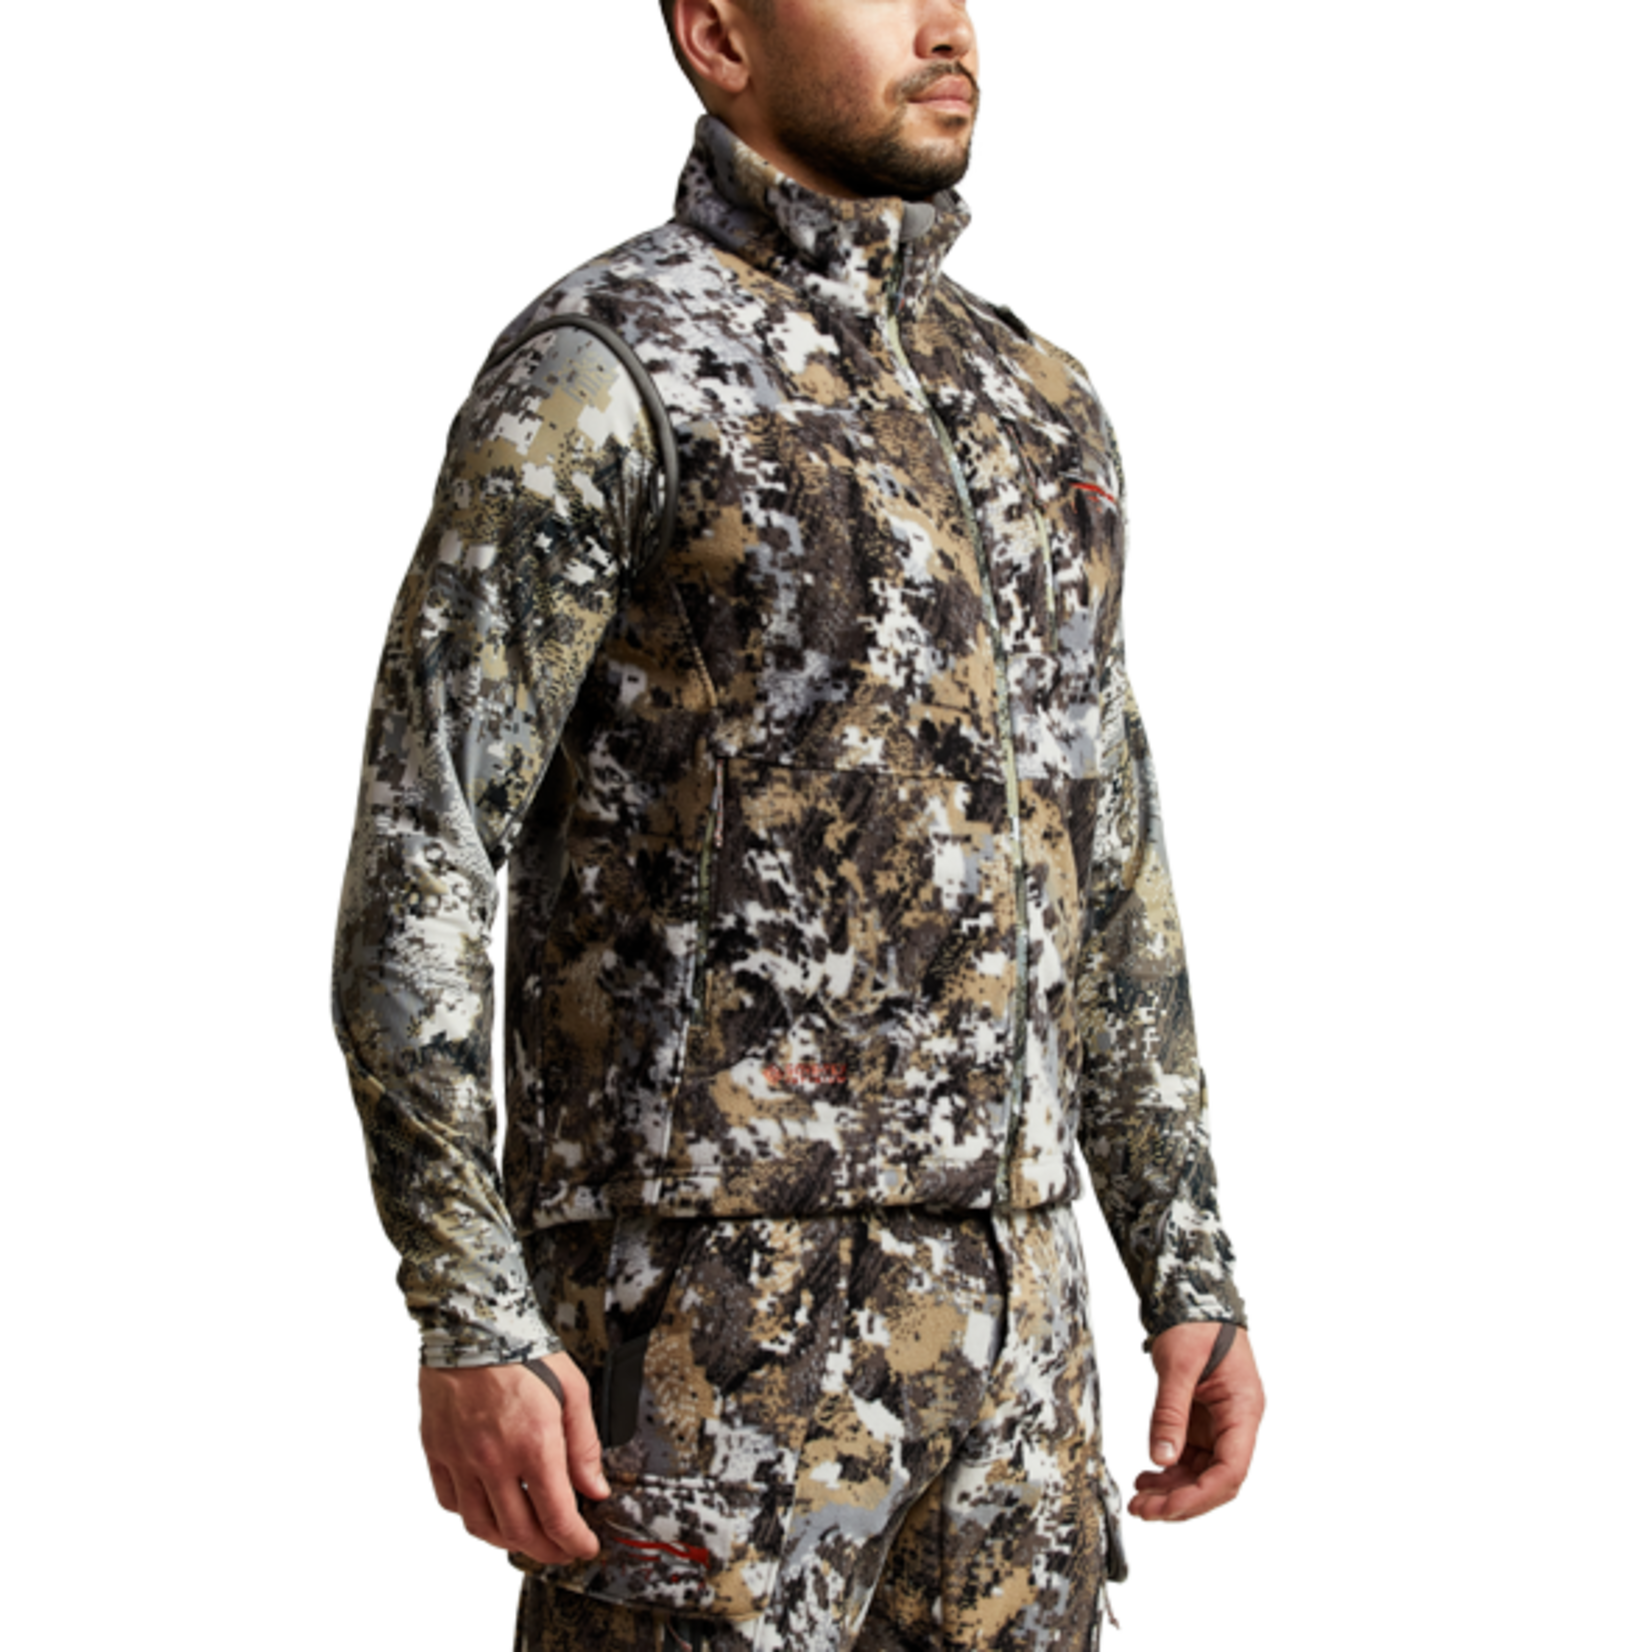 SITKA GEAR STRATUS VEST - ELEVATED